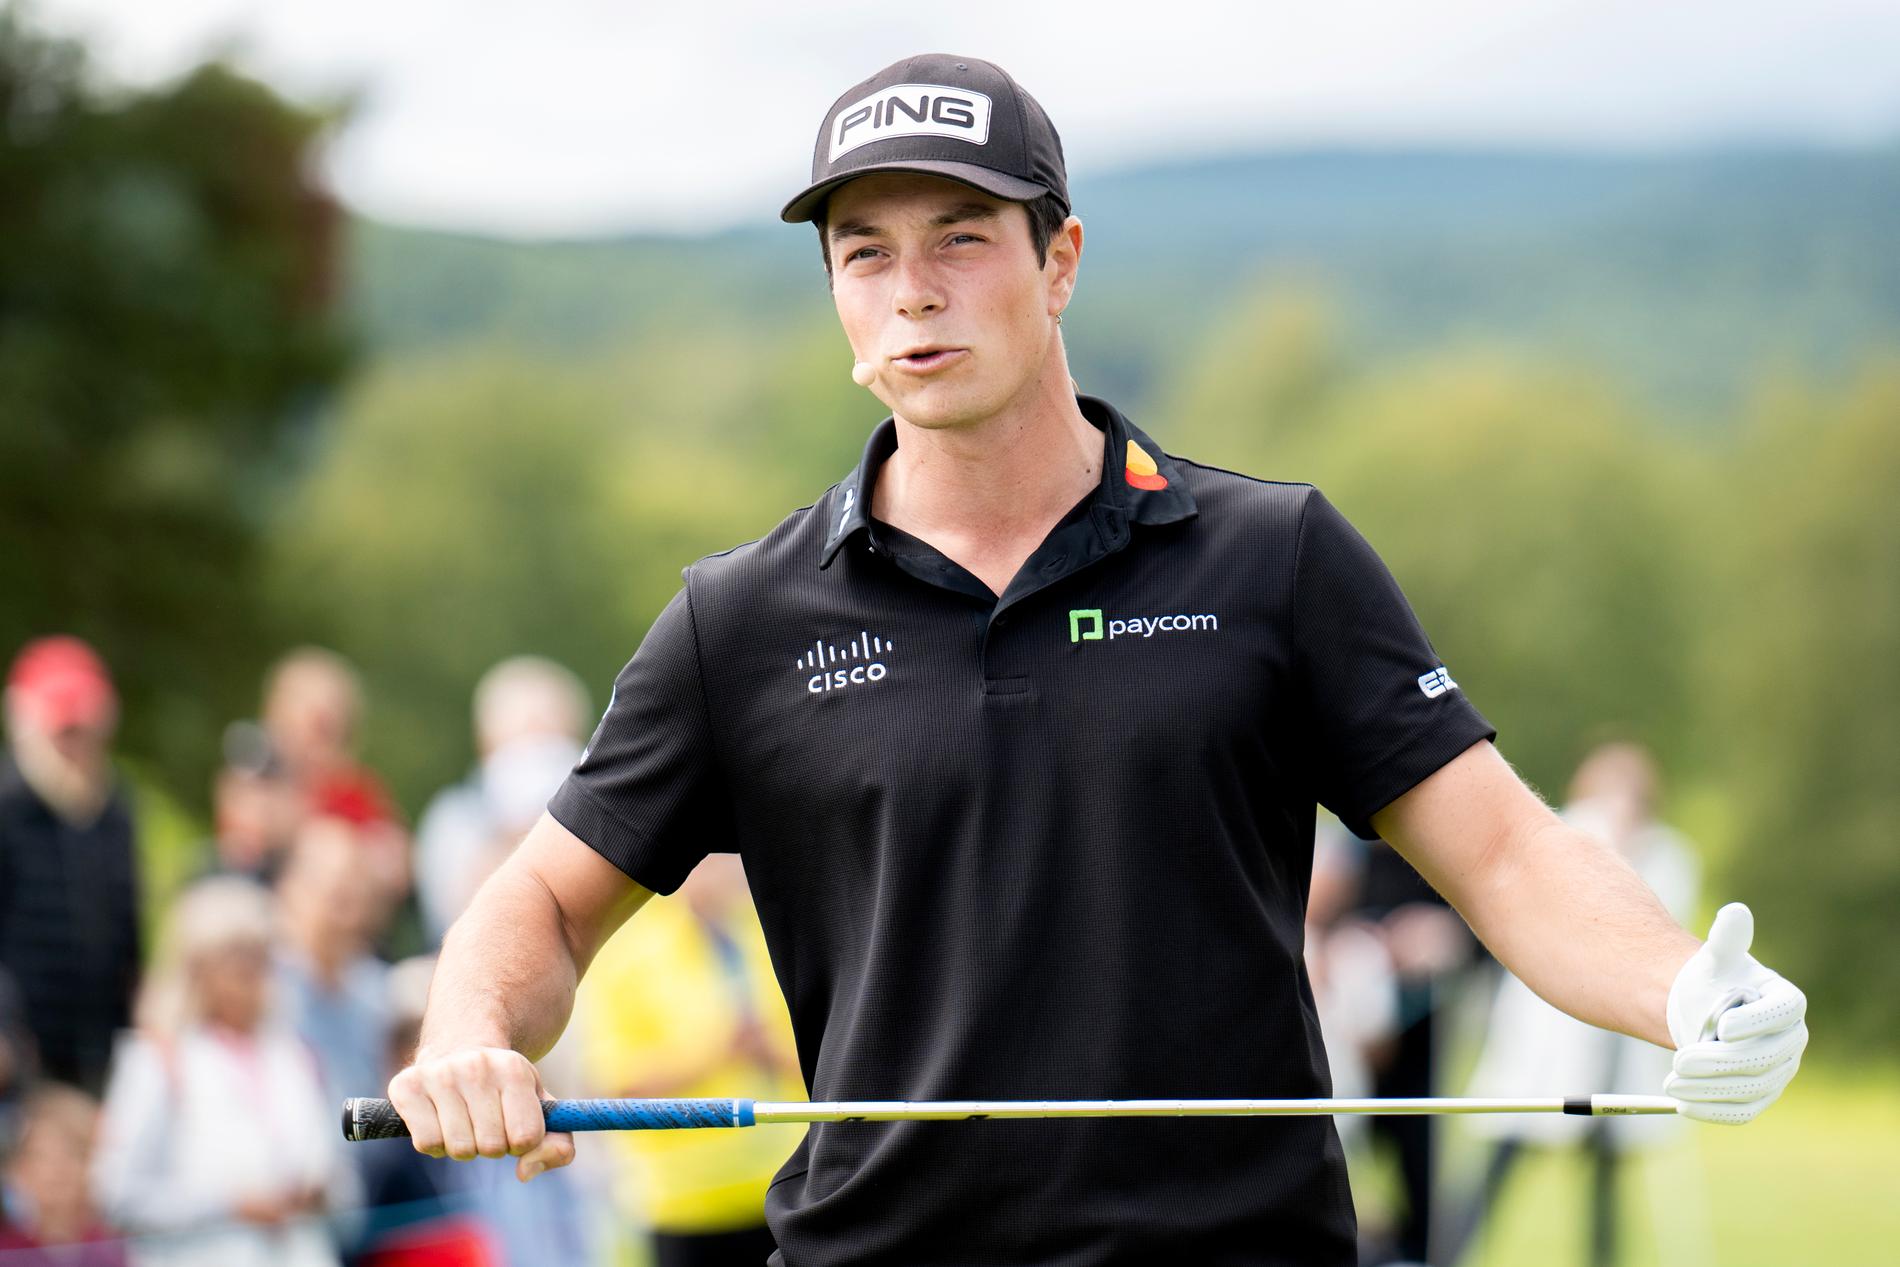 A rocky start to the PGA Qualifier for Hovland – finished two strokes to par